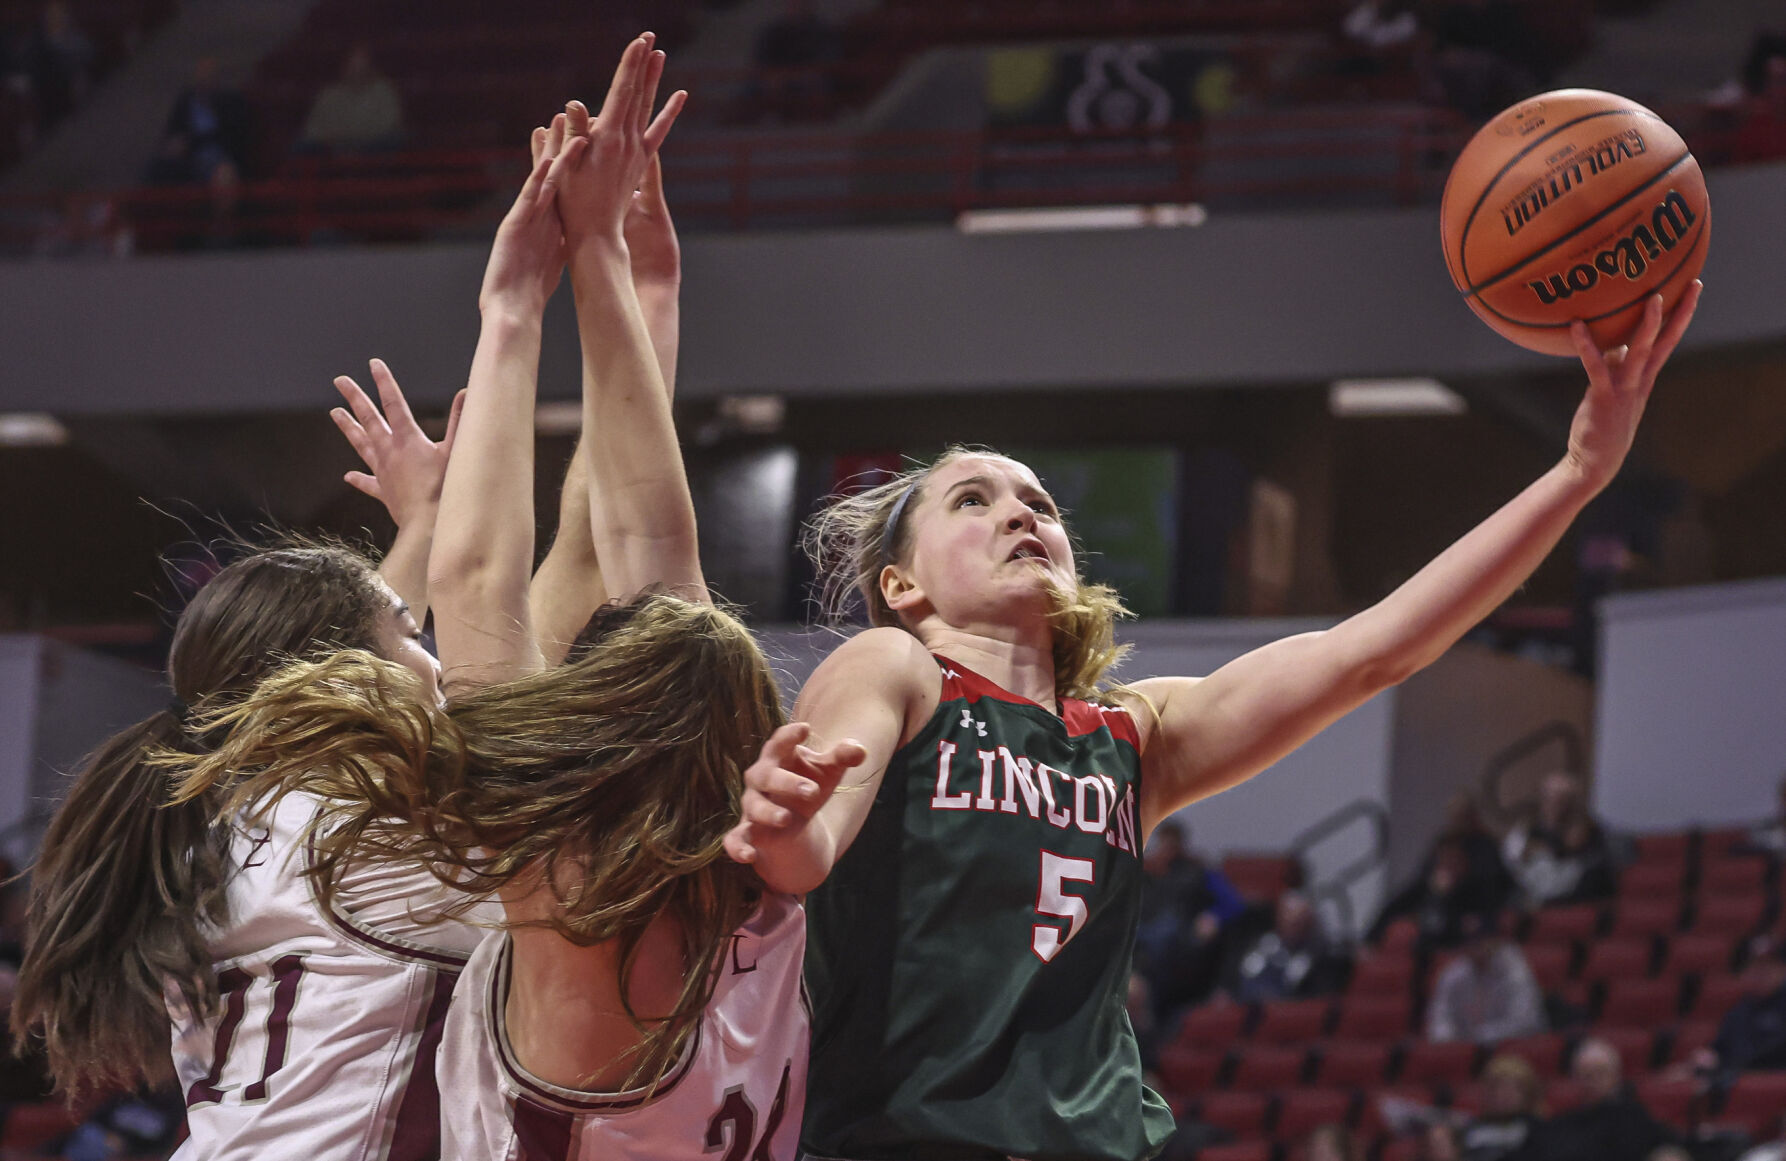 Lincoln’s Kloe Froebe: Pantagraph Player of the Year for 3rd Season, Leads to Championship